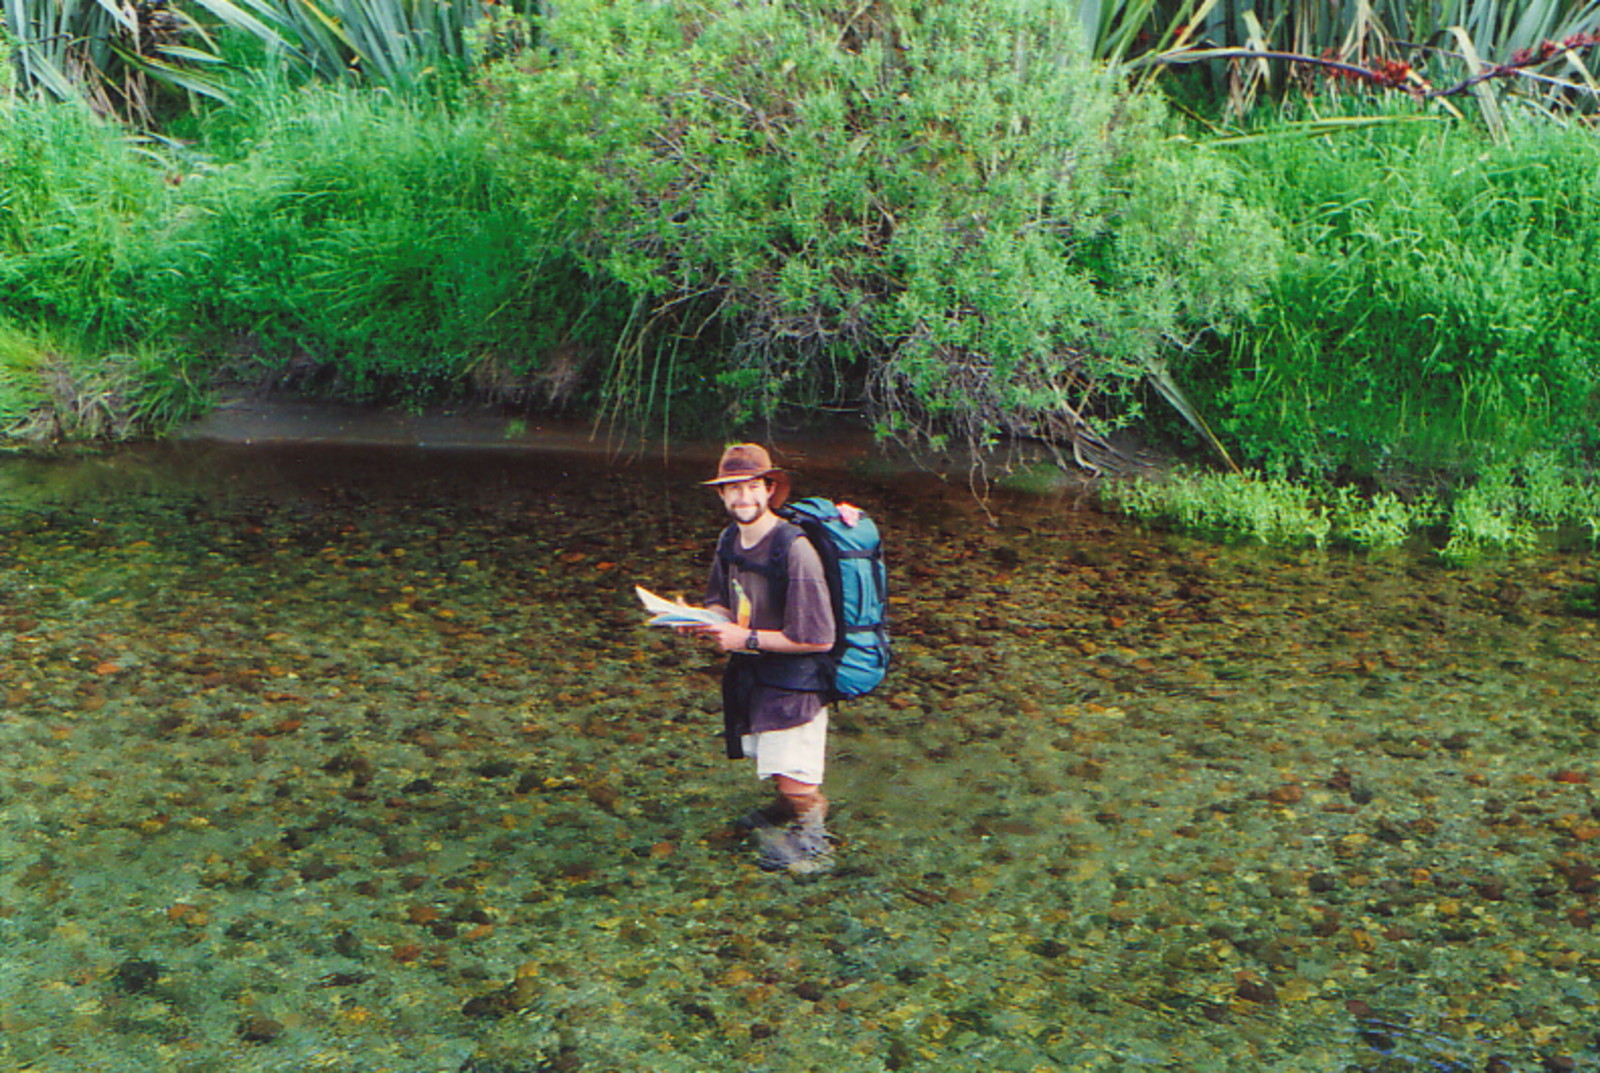 Mark wading across the Barrier River